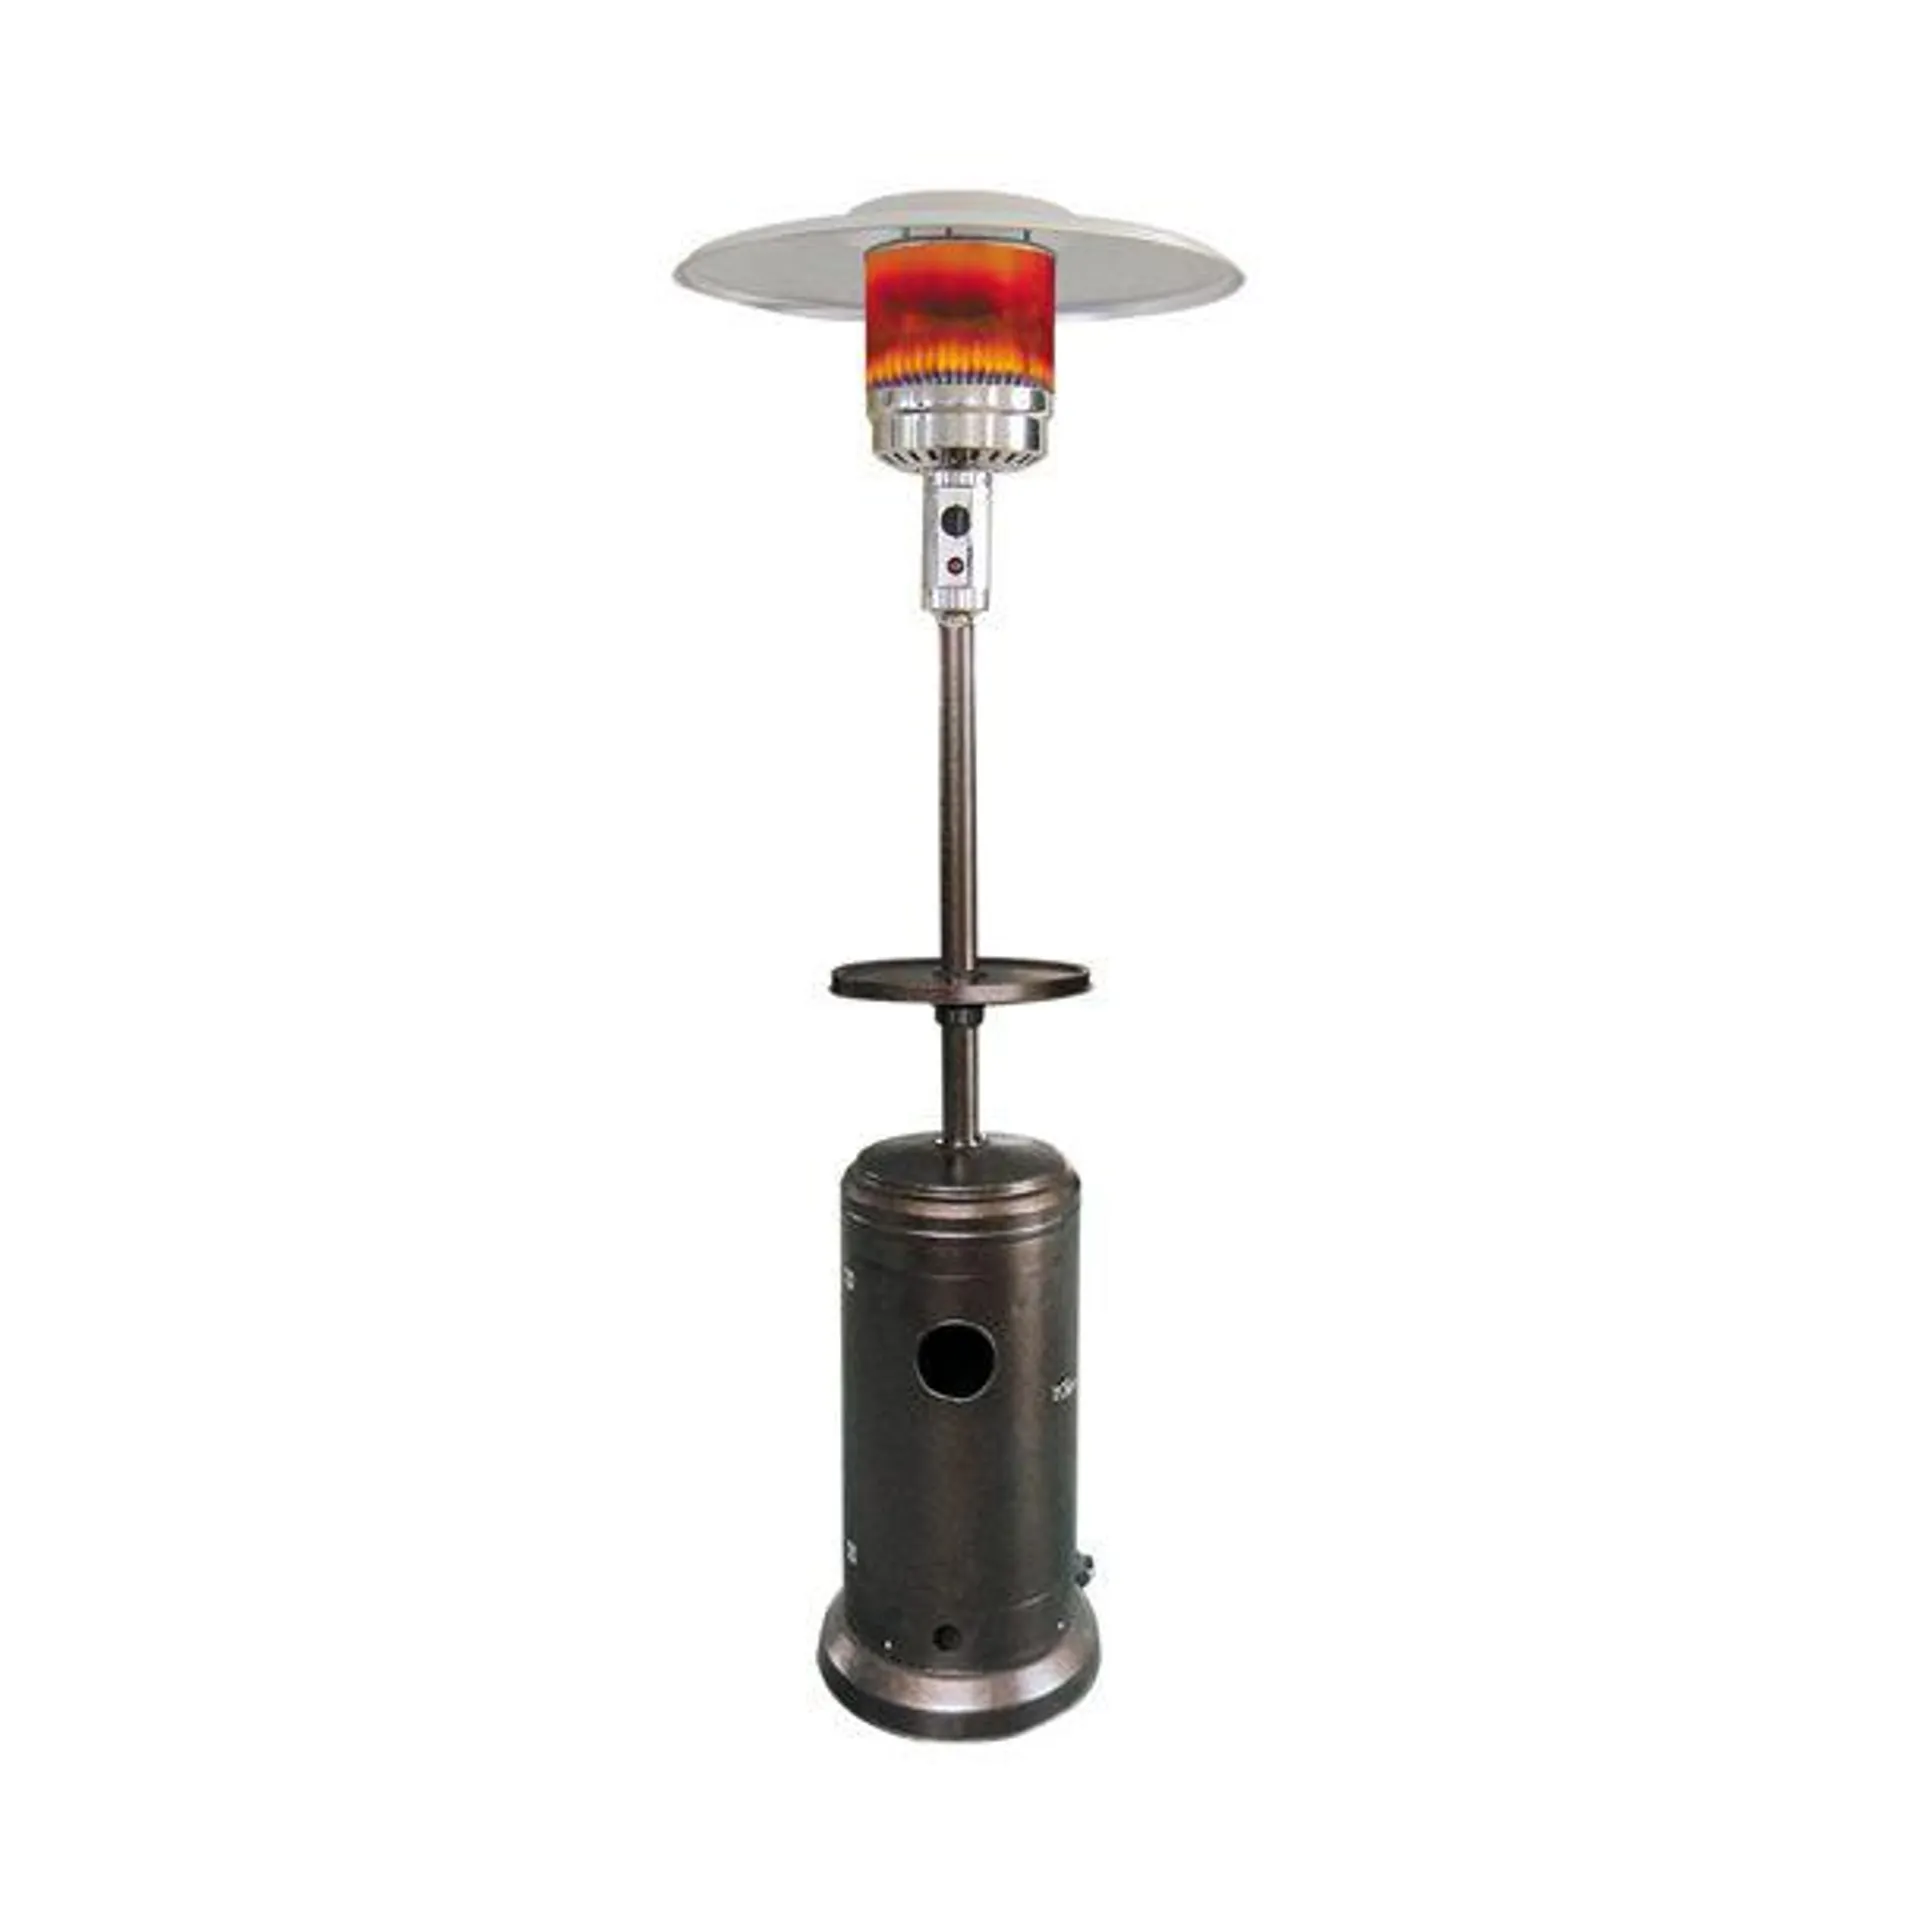 Patio Heater with Golden Hammered Design